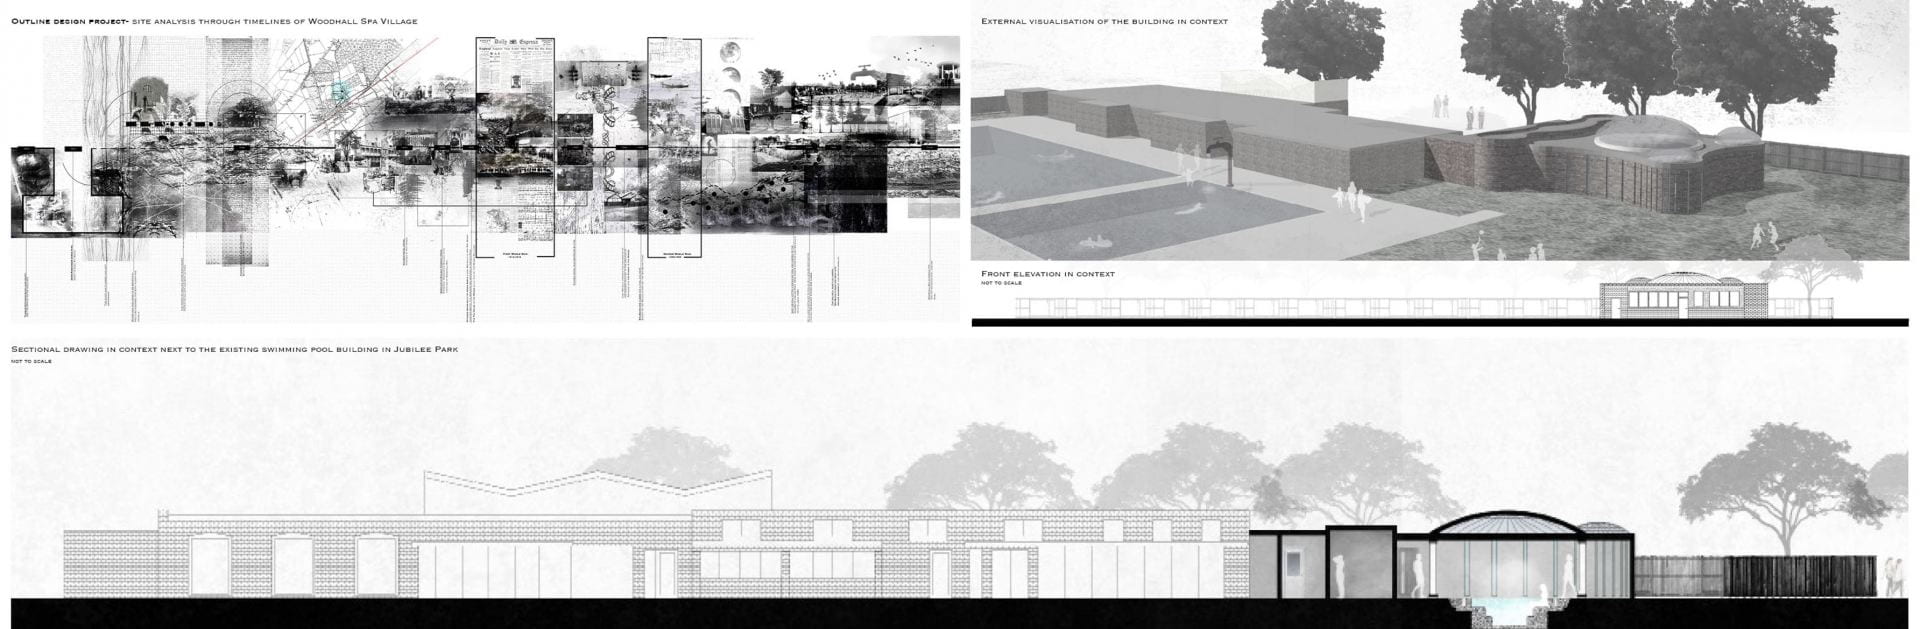 Initial designs for jubilee park showing its elevation